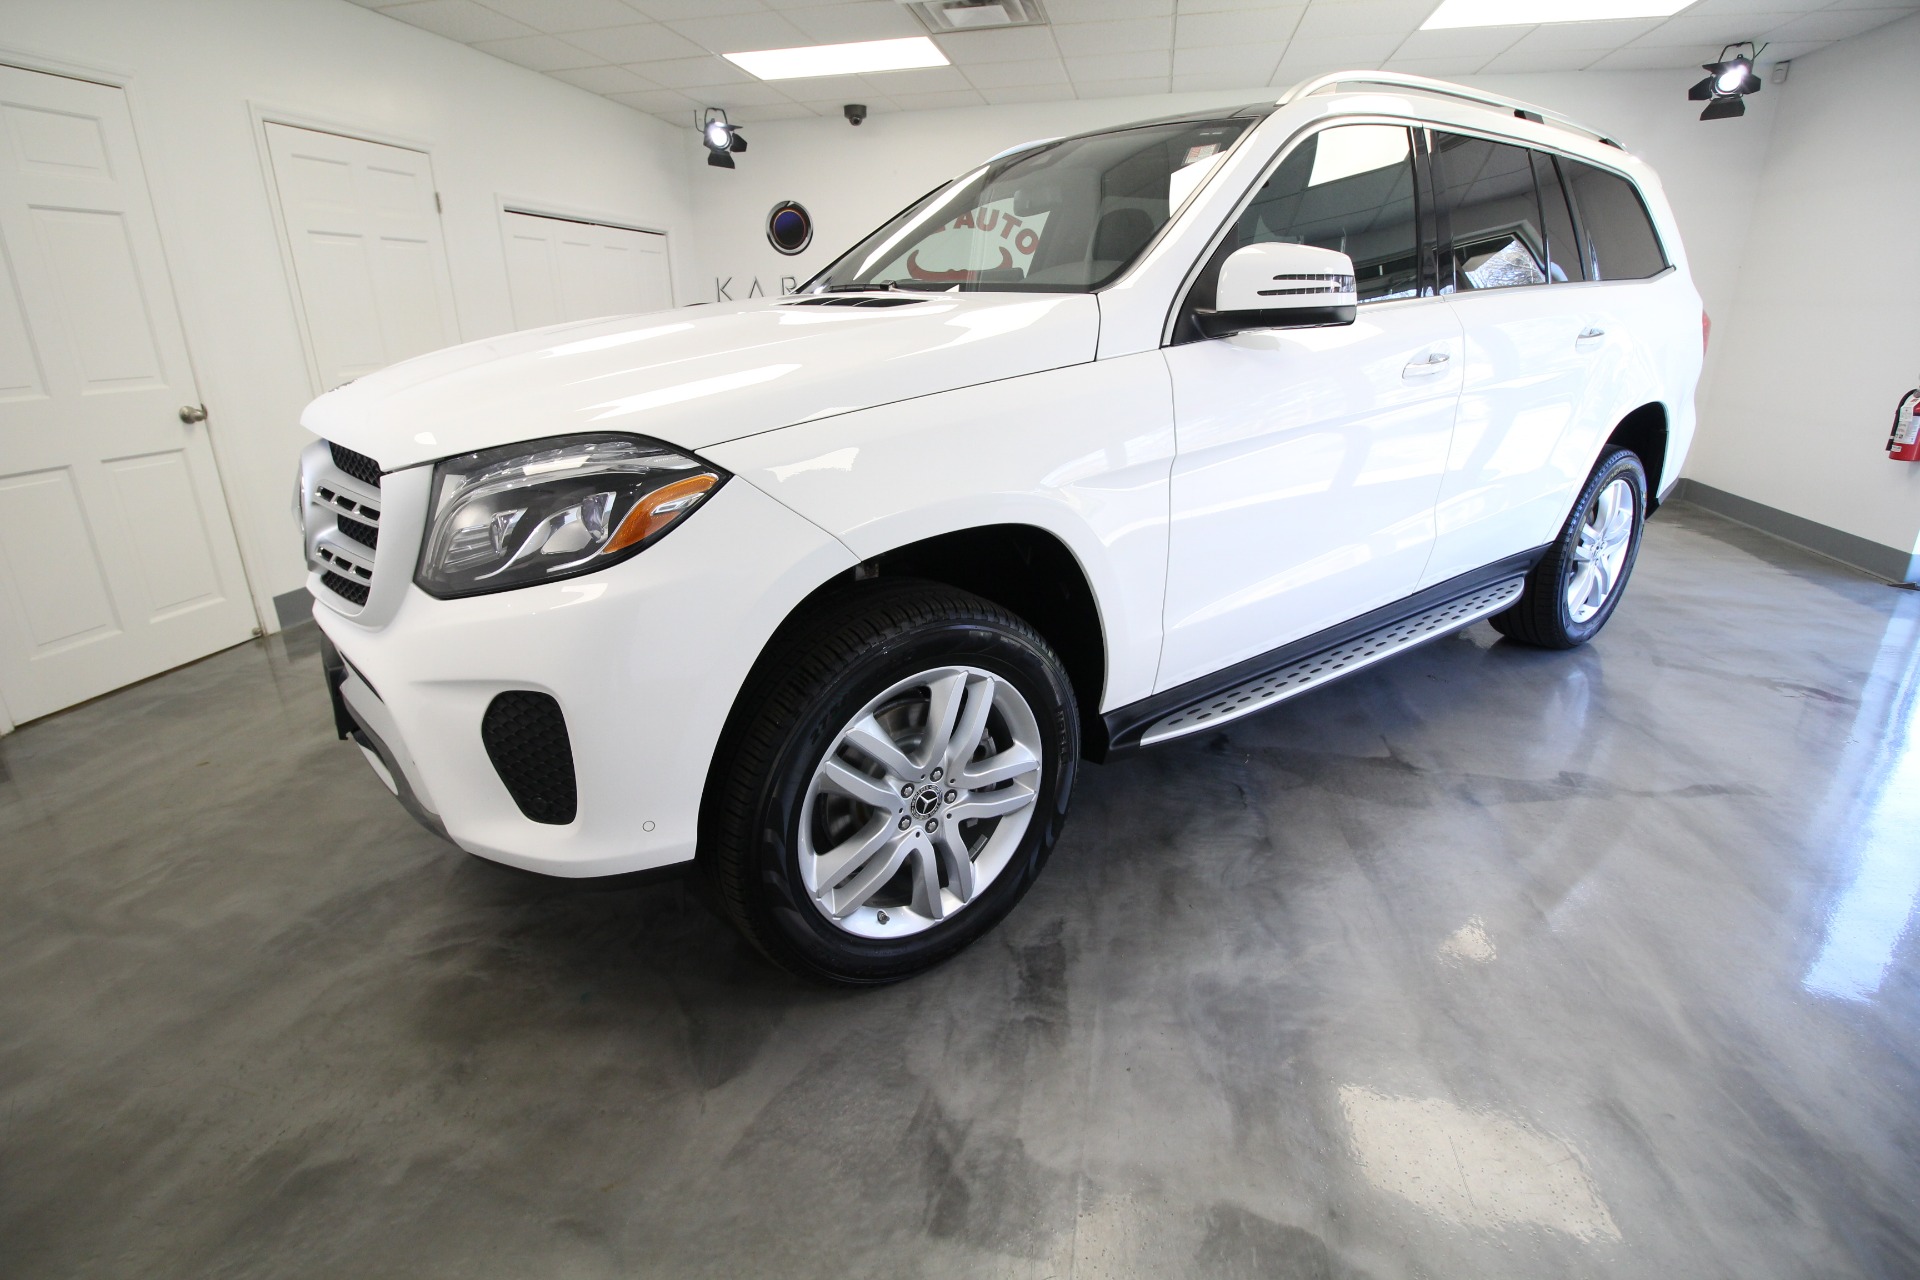 Used 2017 Polar White Mercedes-Benz GLS-Class GLS450 4MATIC LOADED GLS | Albany, NY